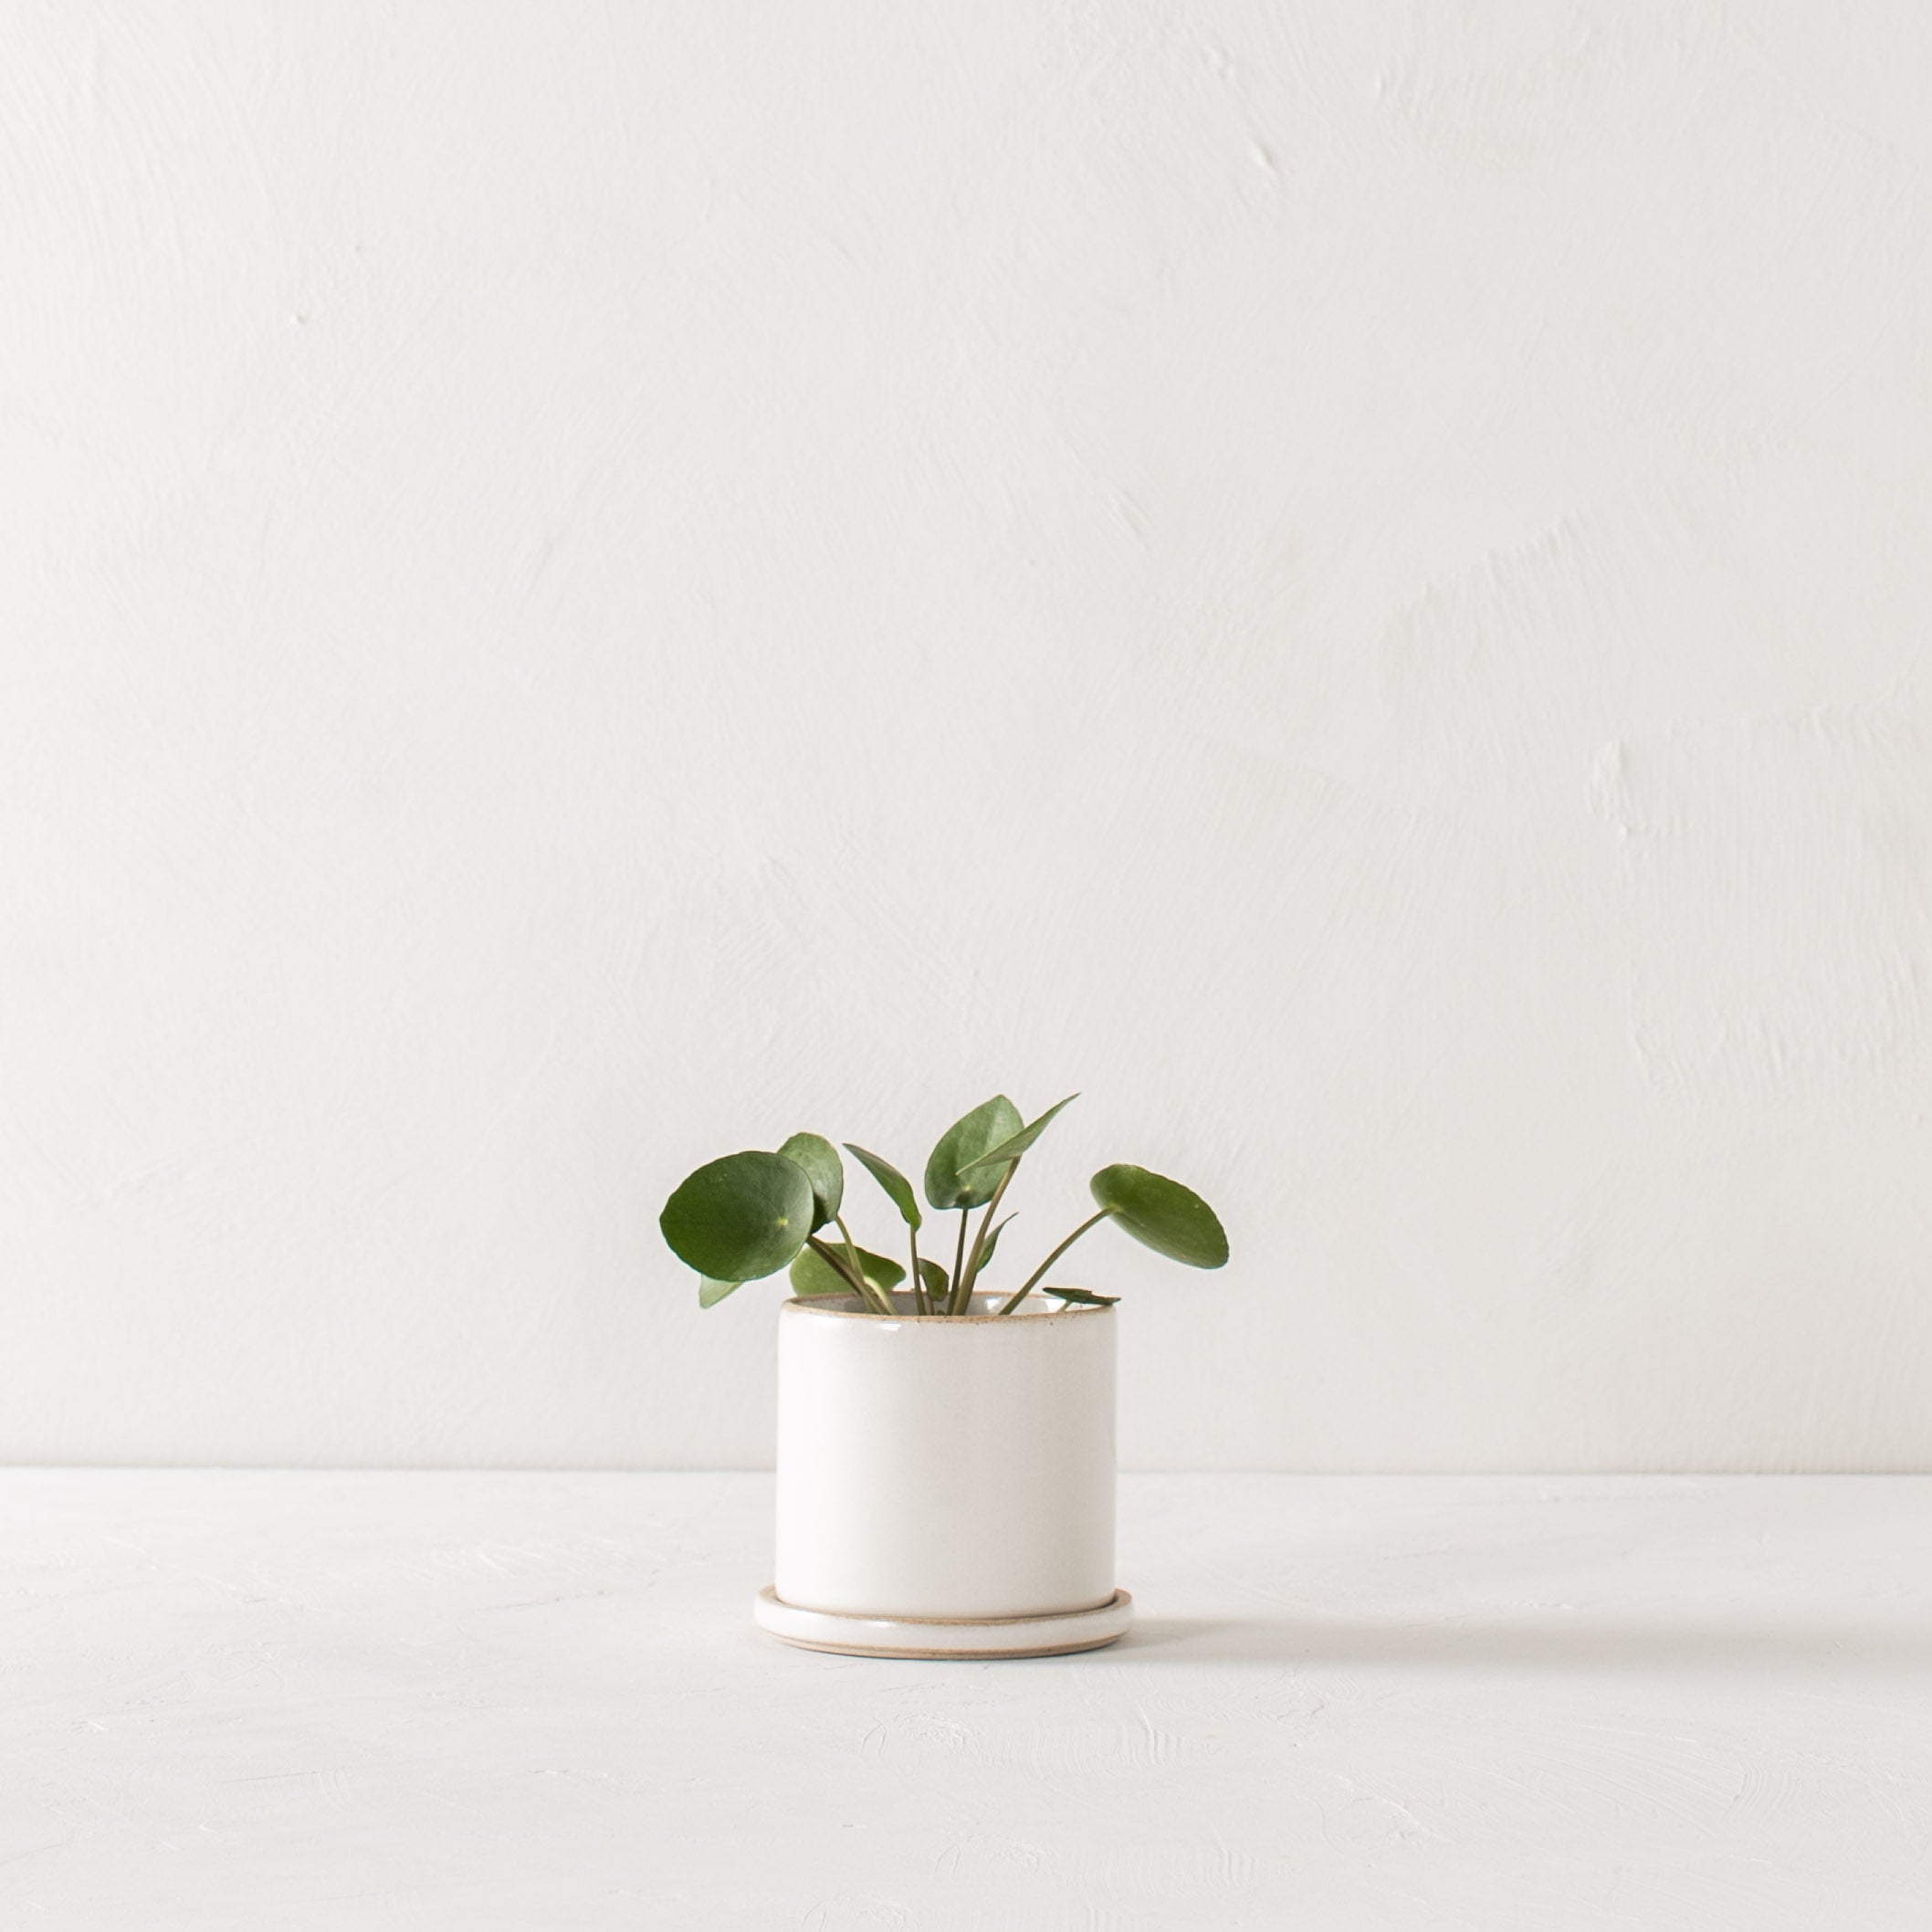 Minimal white 4 inch ceramic planter with bottom drainage dish. Planter houses plant in the center of image on white textured tabletop and white textured backdrop. Handmade ceramic planter, designed and sold by Convivial Production, Kansas City ceramics.